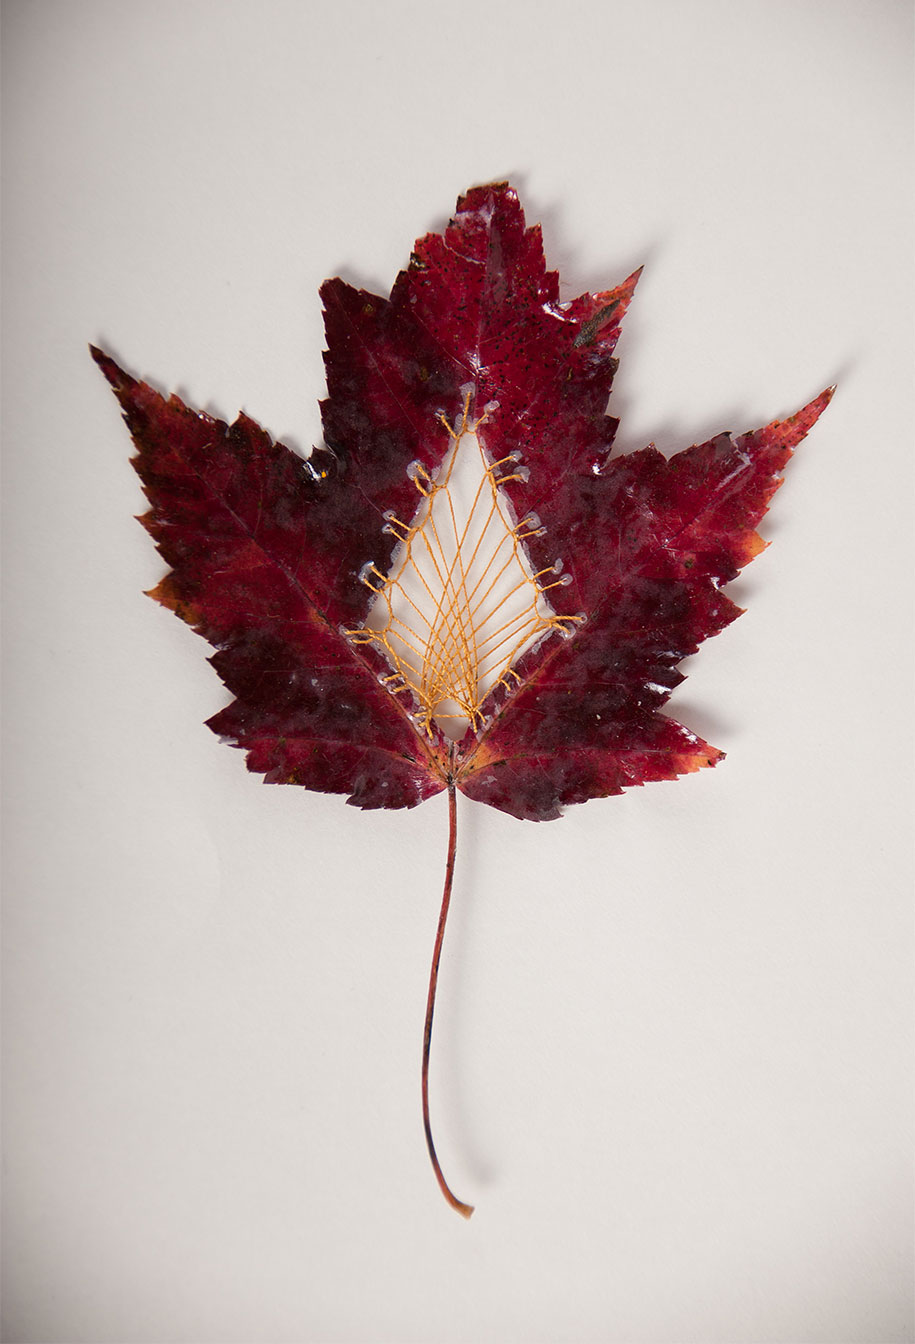 embroidery-art-stitched-leaves-hillary-fayle-15